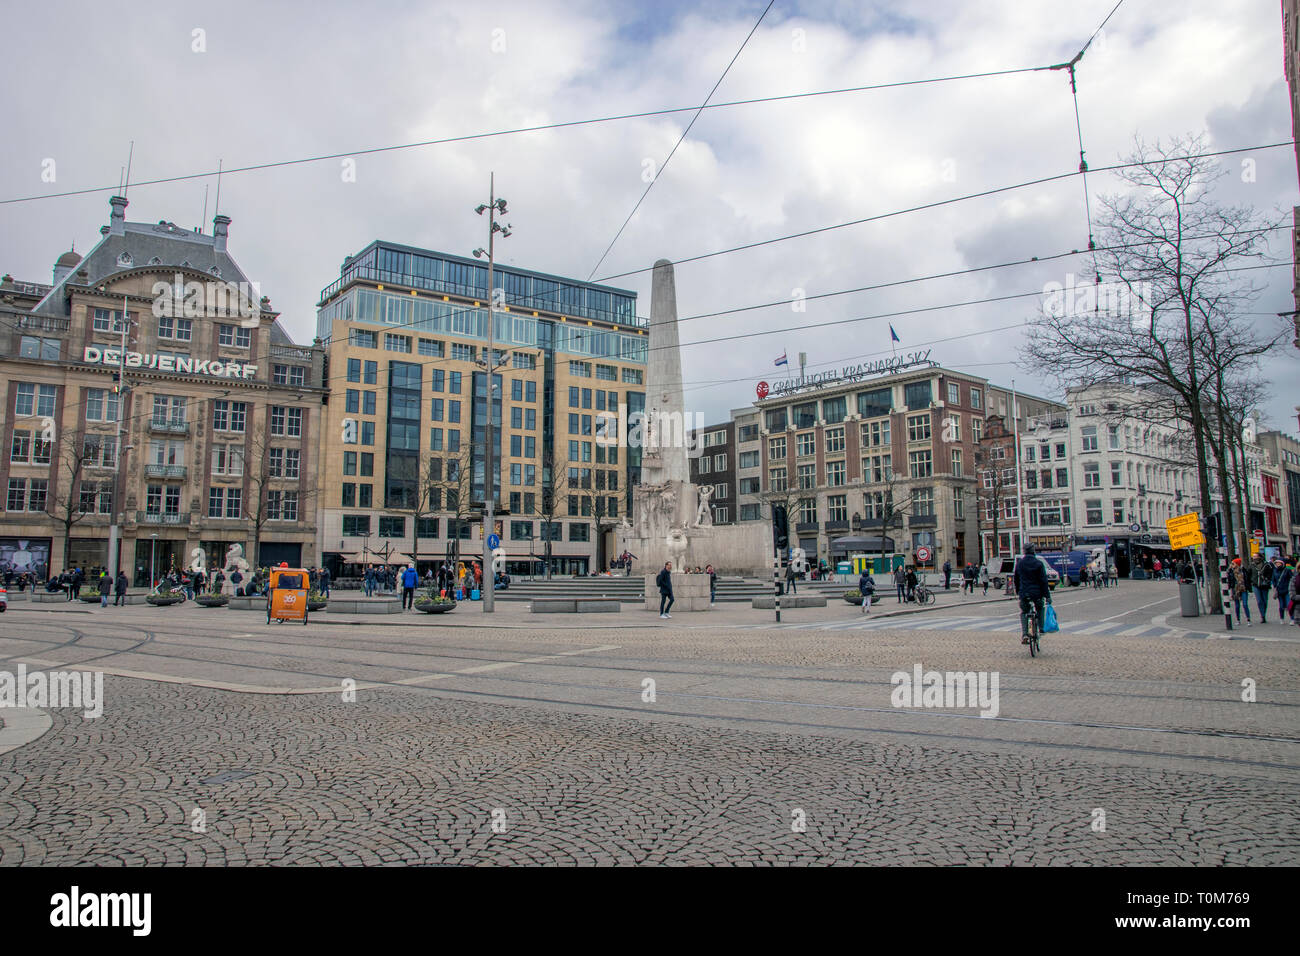 The Dam Square At Amsterdam The Netherlands 2019 Stock Photo